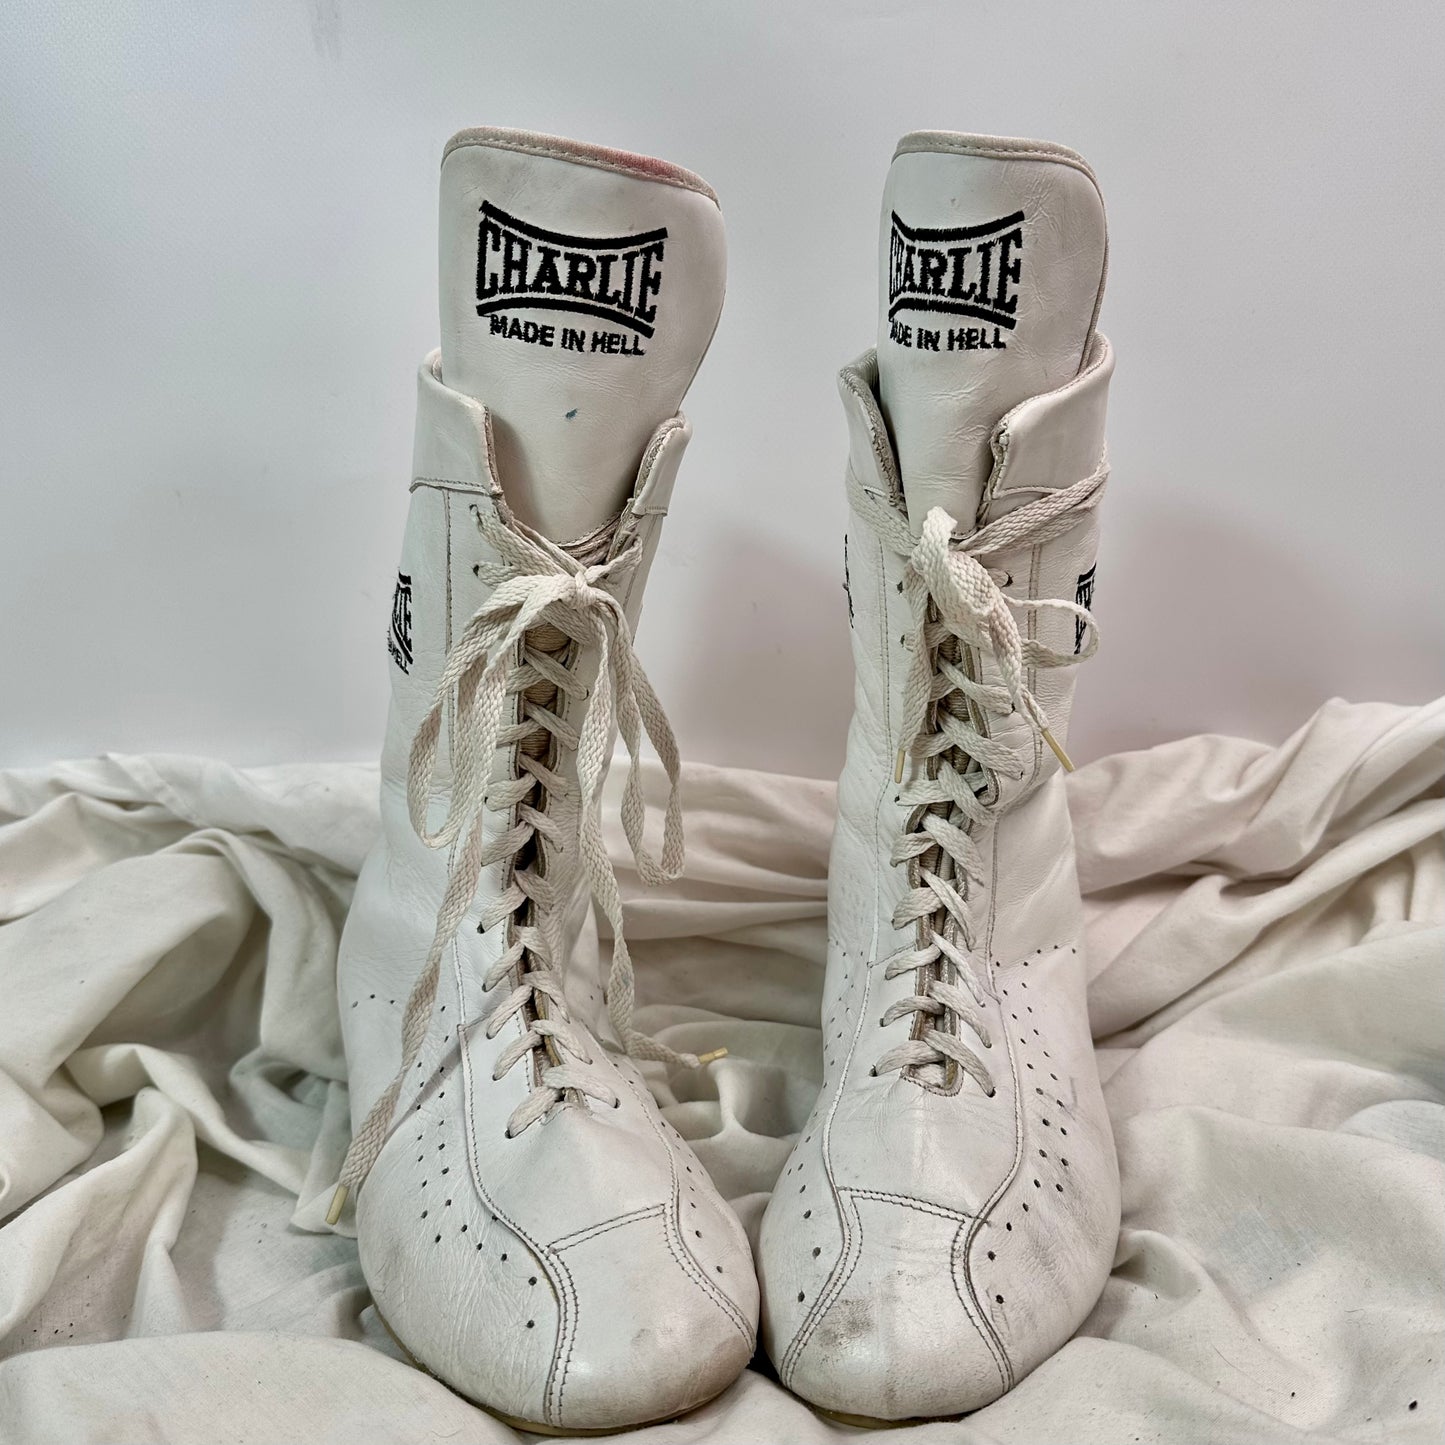 RARE Everlast Charlie in Hell Vintage Boxing Boots